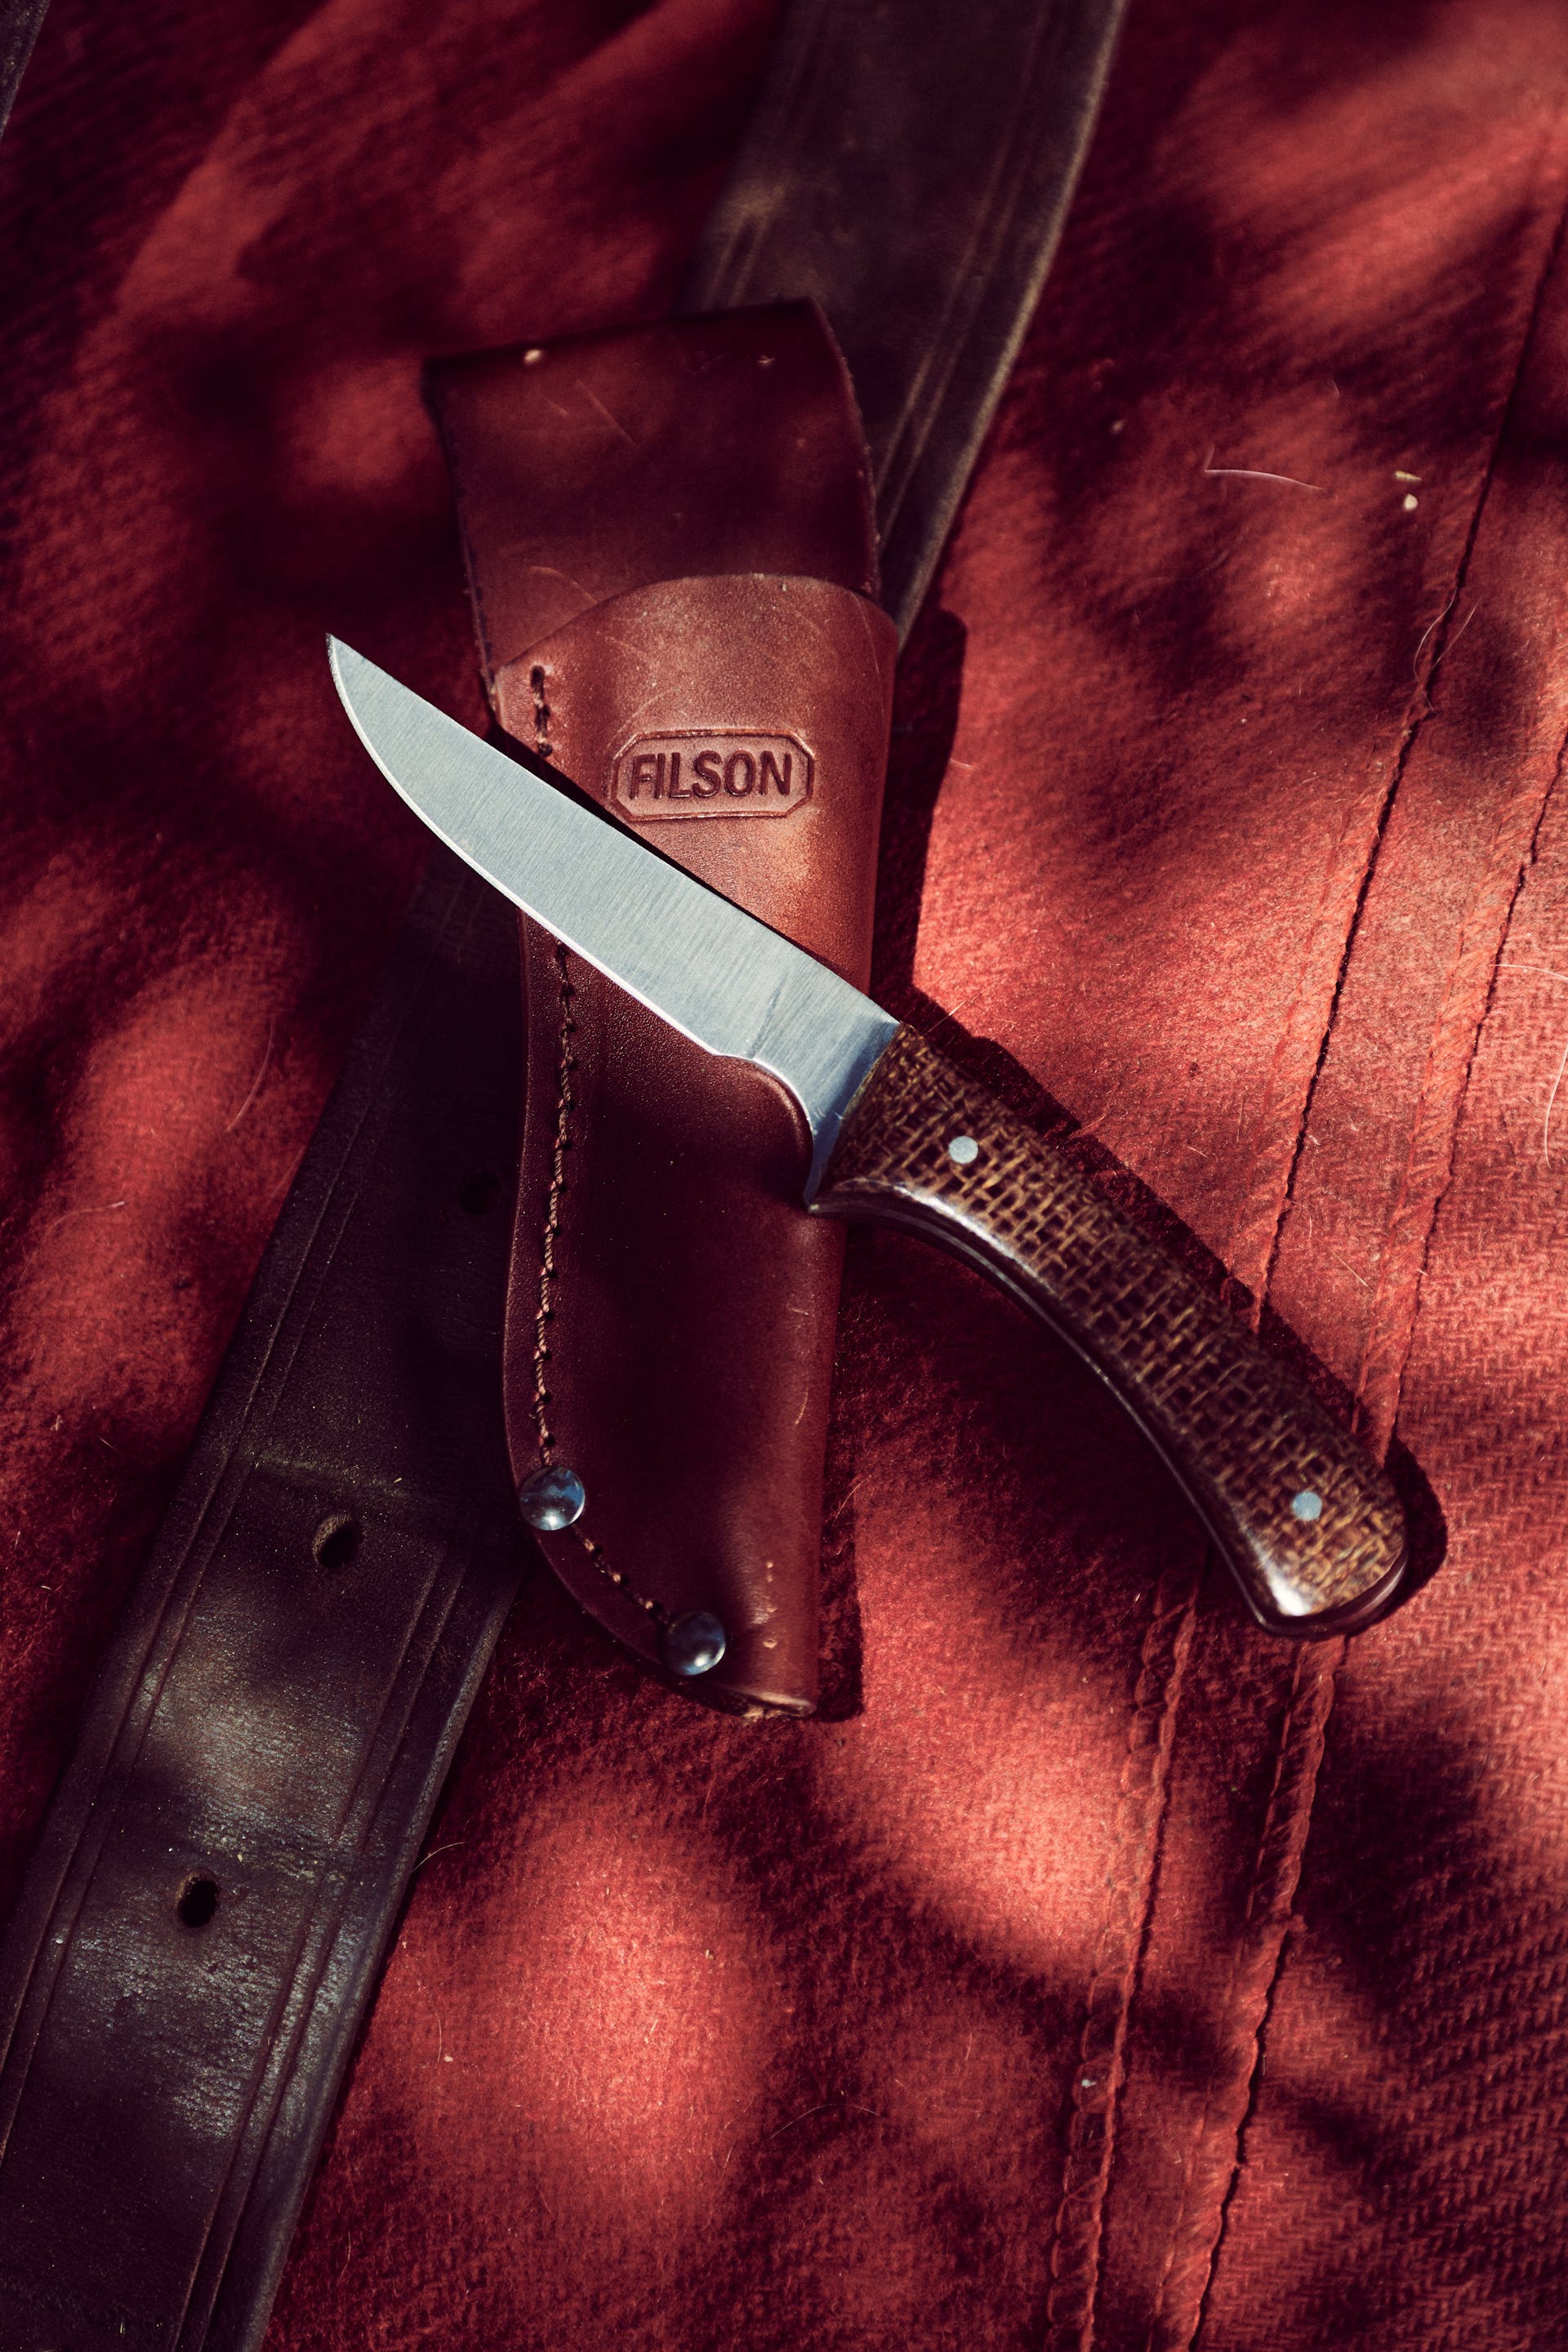 Filson Bird & Trout Knife resting on its sheath on red fabric